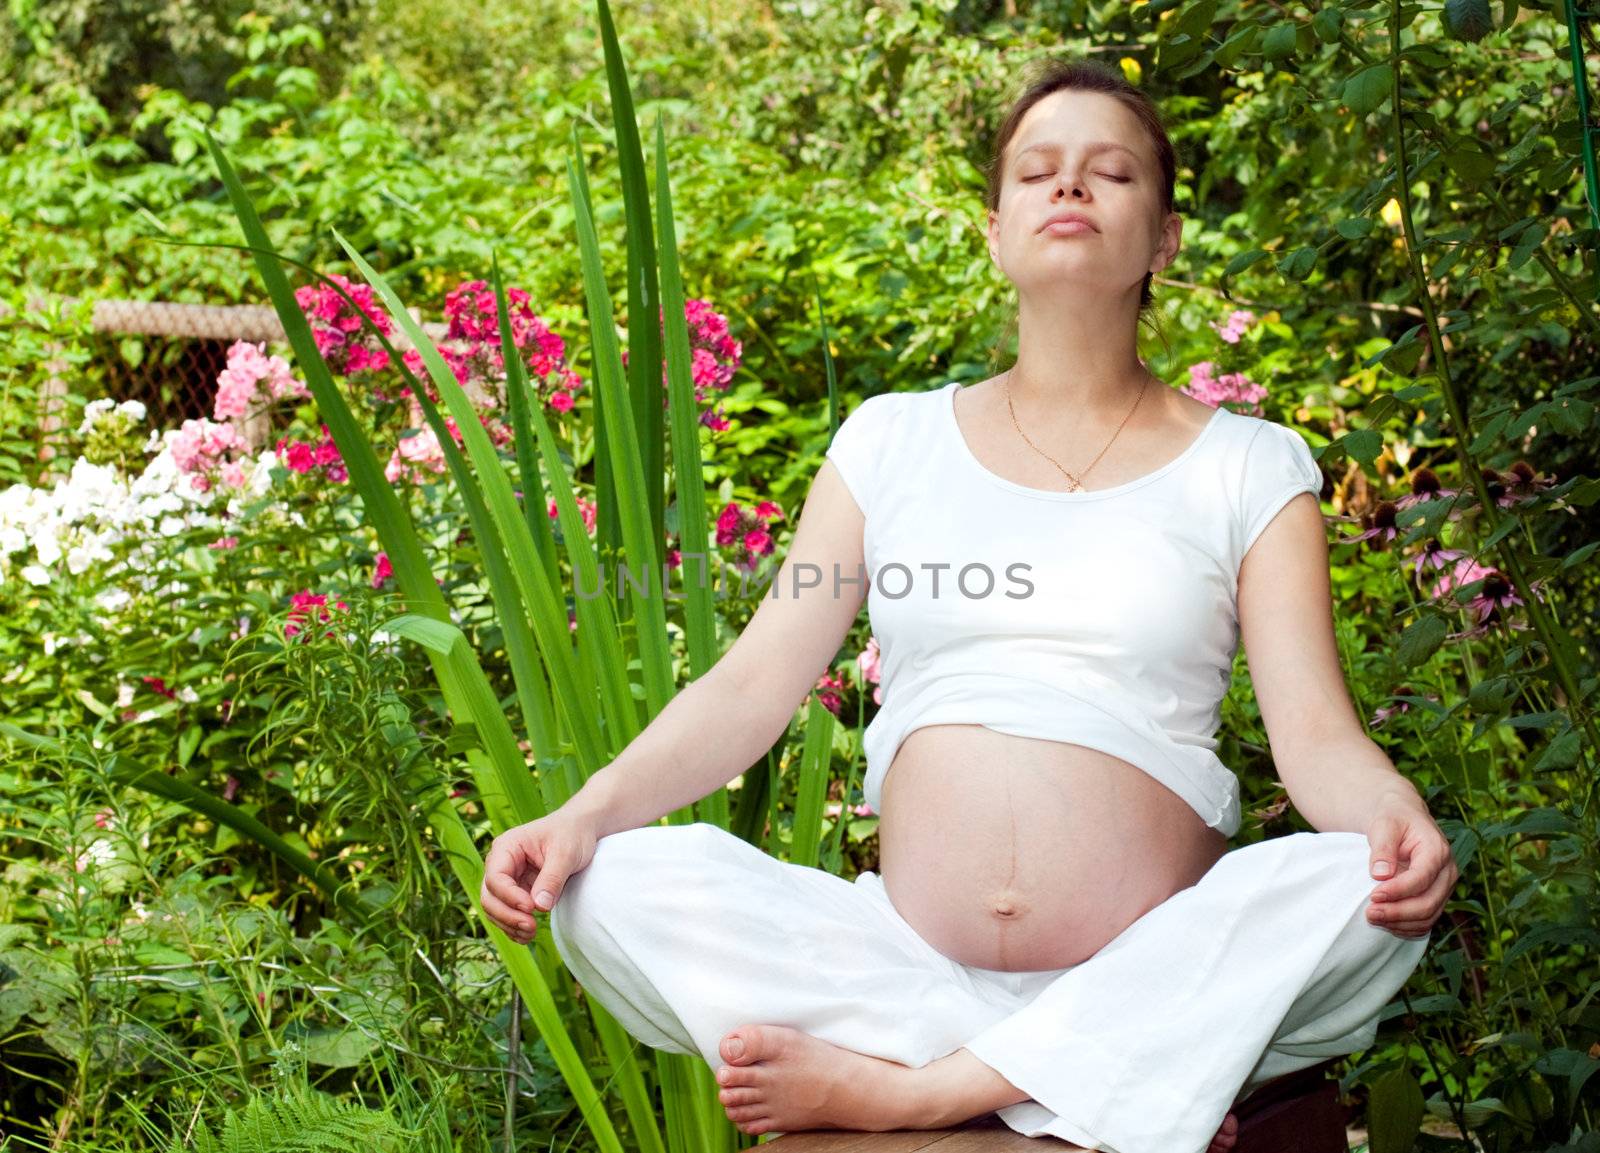 Young pregnant woman relaxing in a summer garden